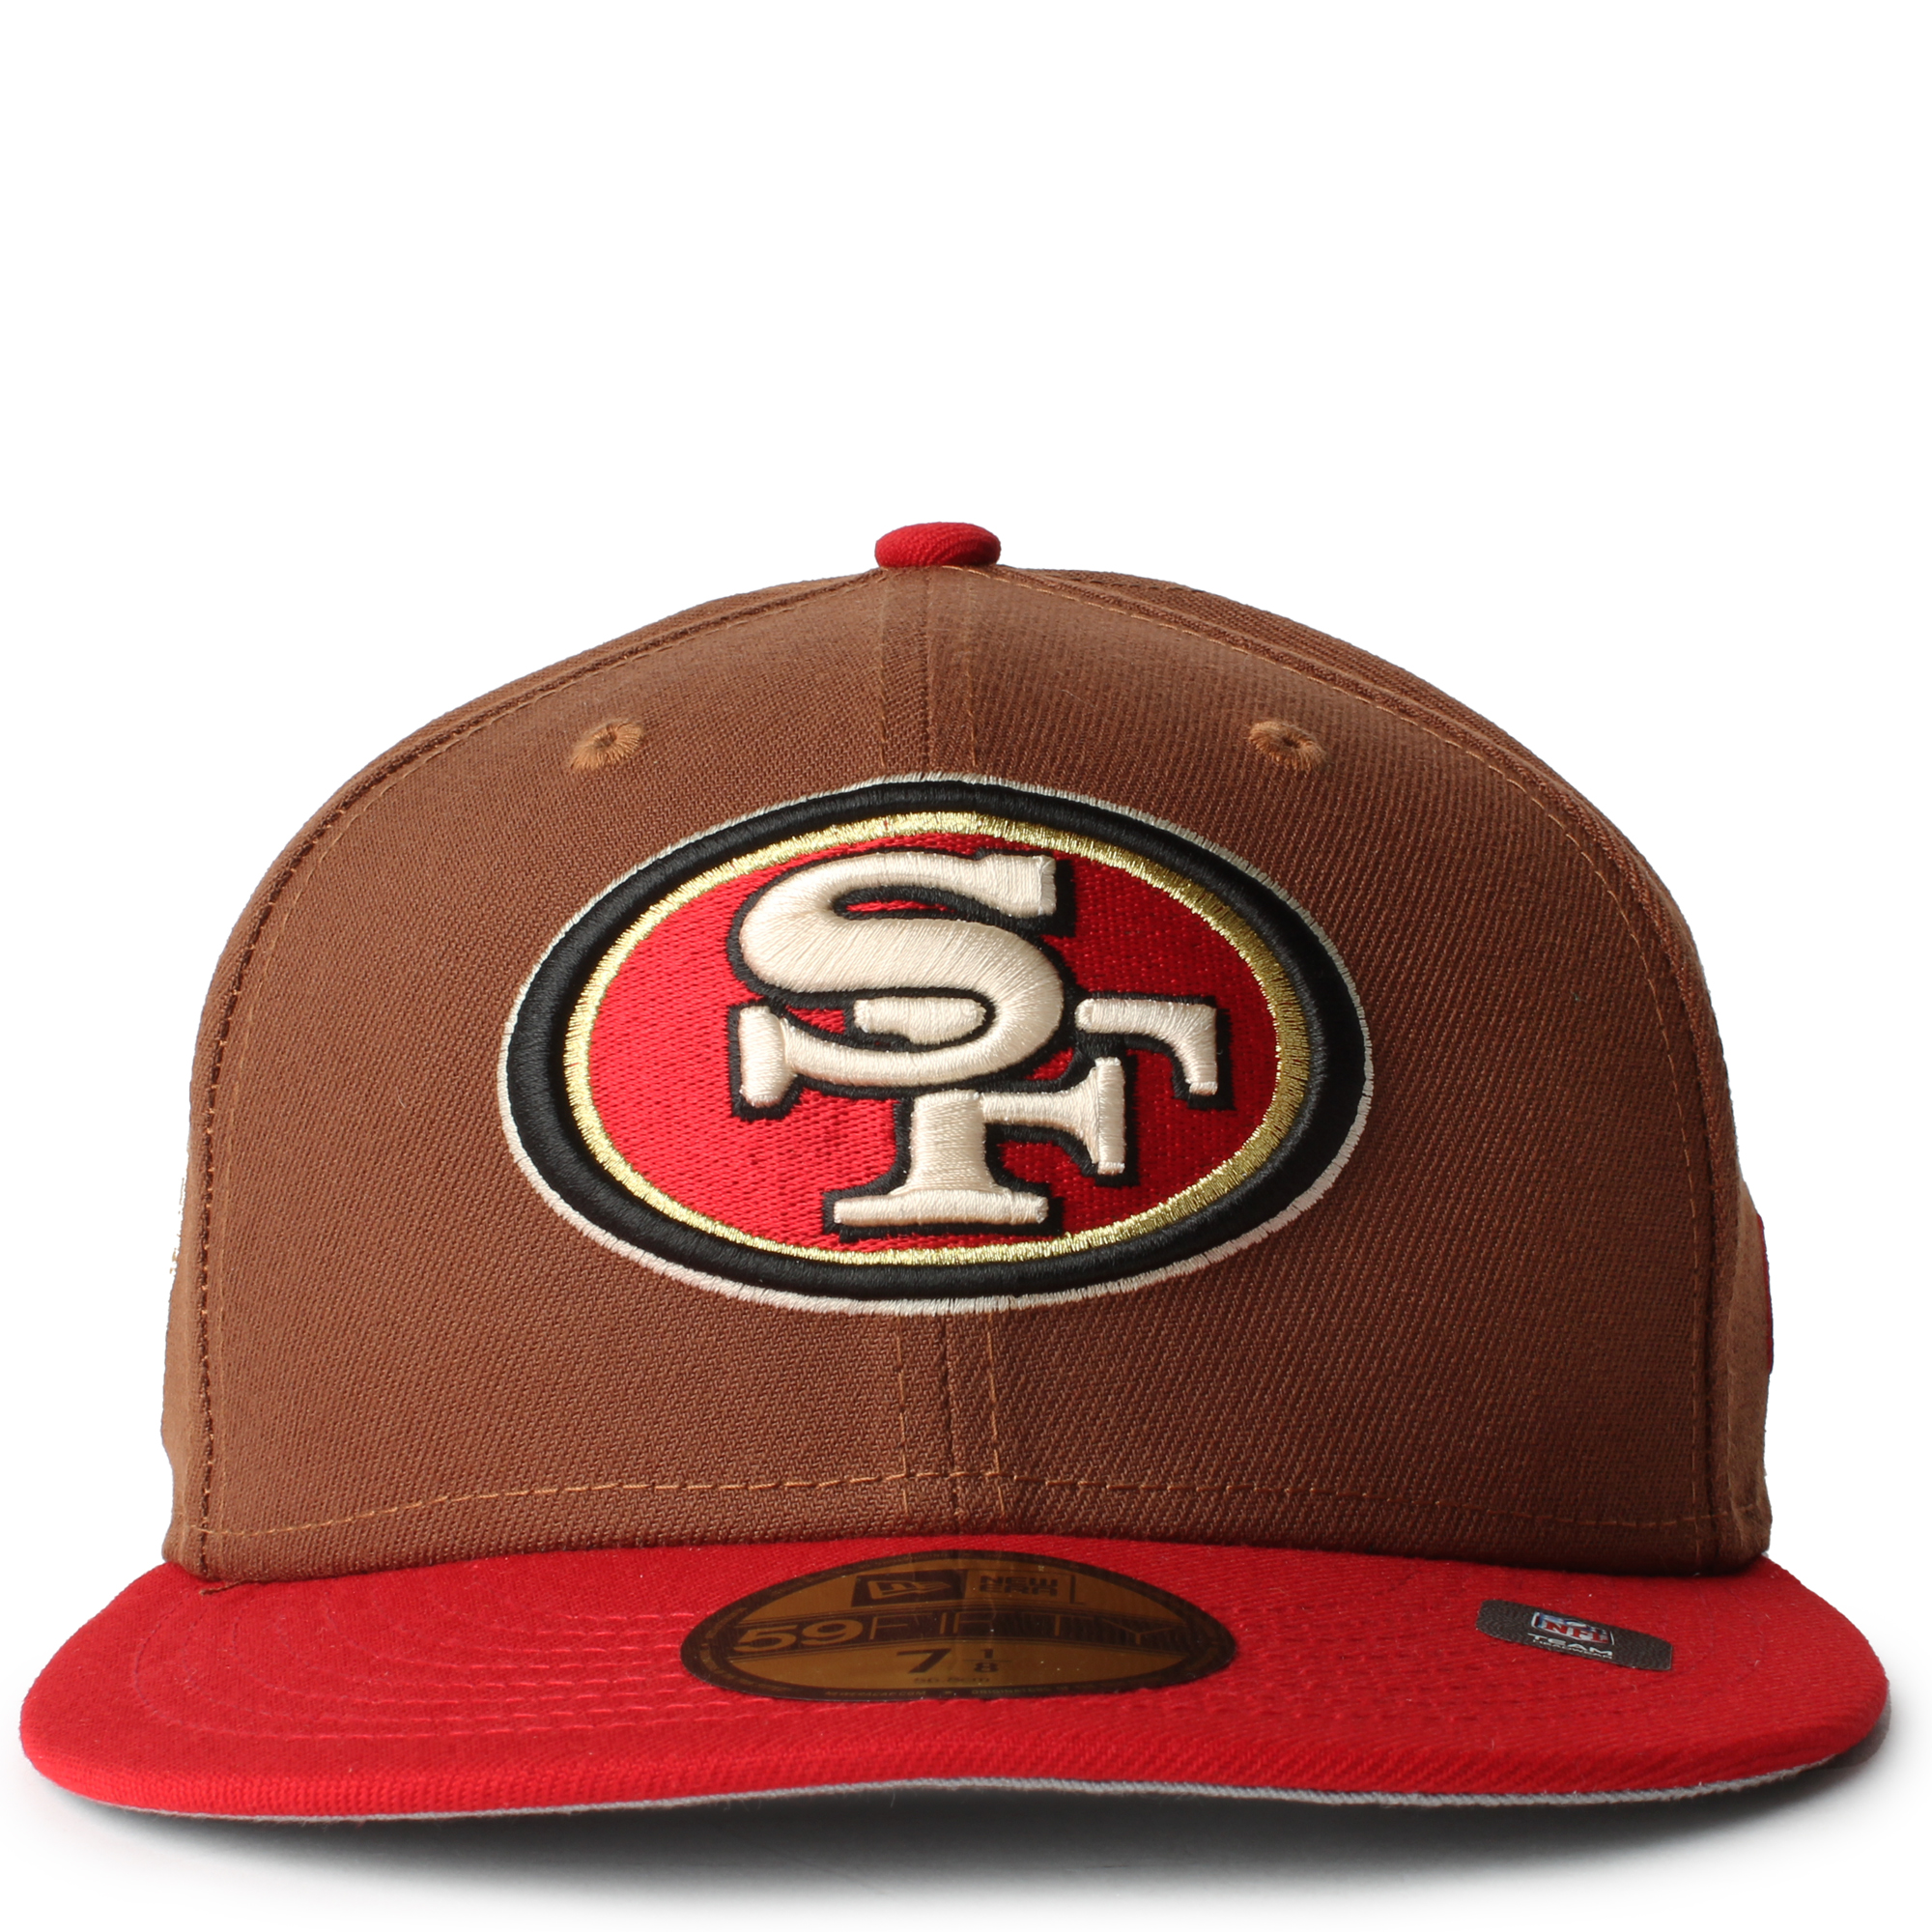 New Era, Accessories, New Era 49ers Fitted Hat